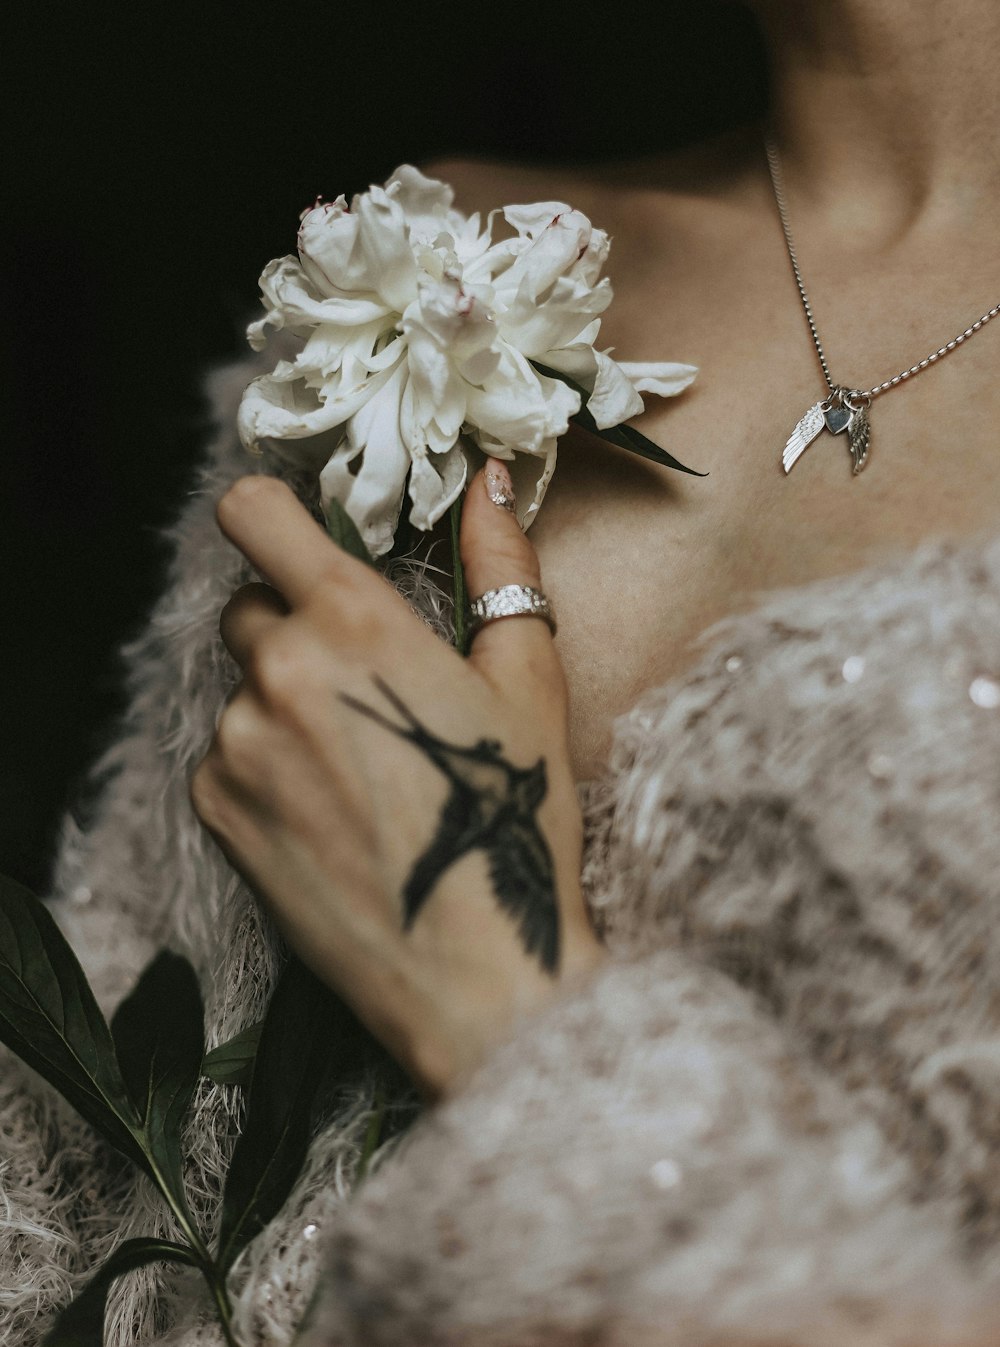 a hand holding a white flower